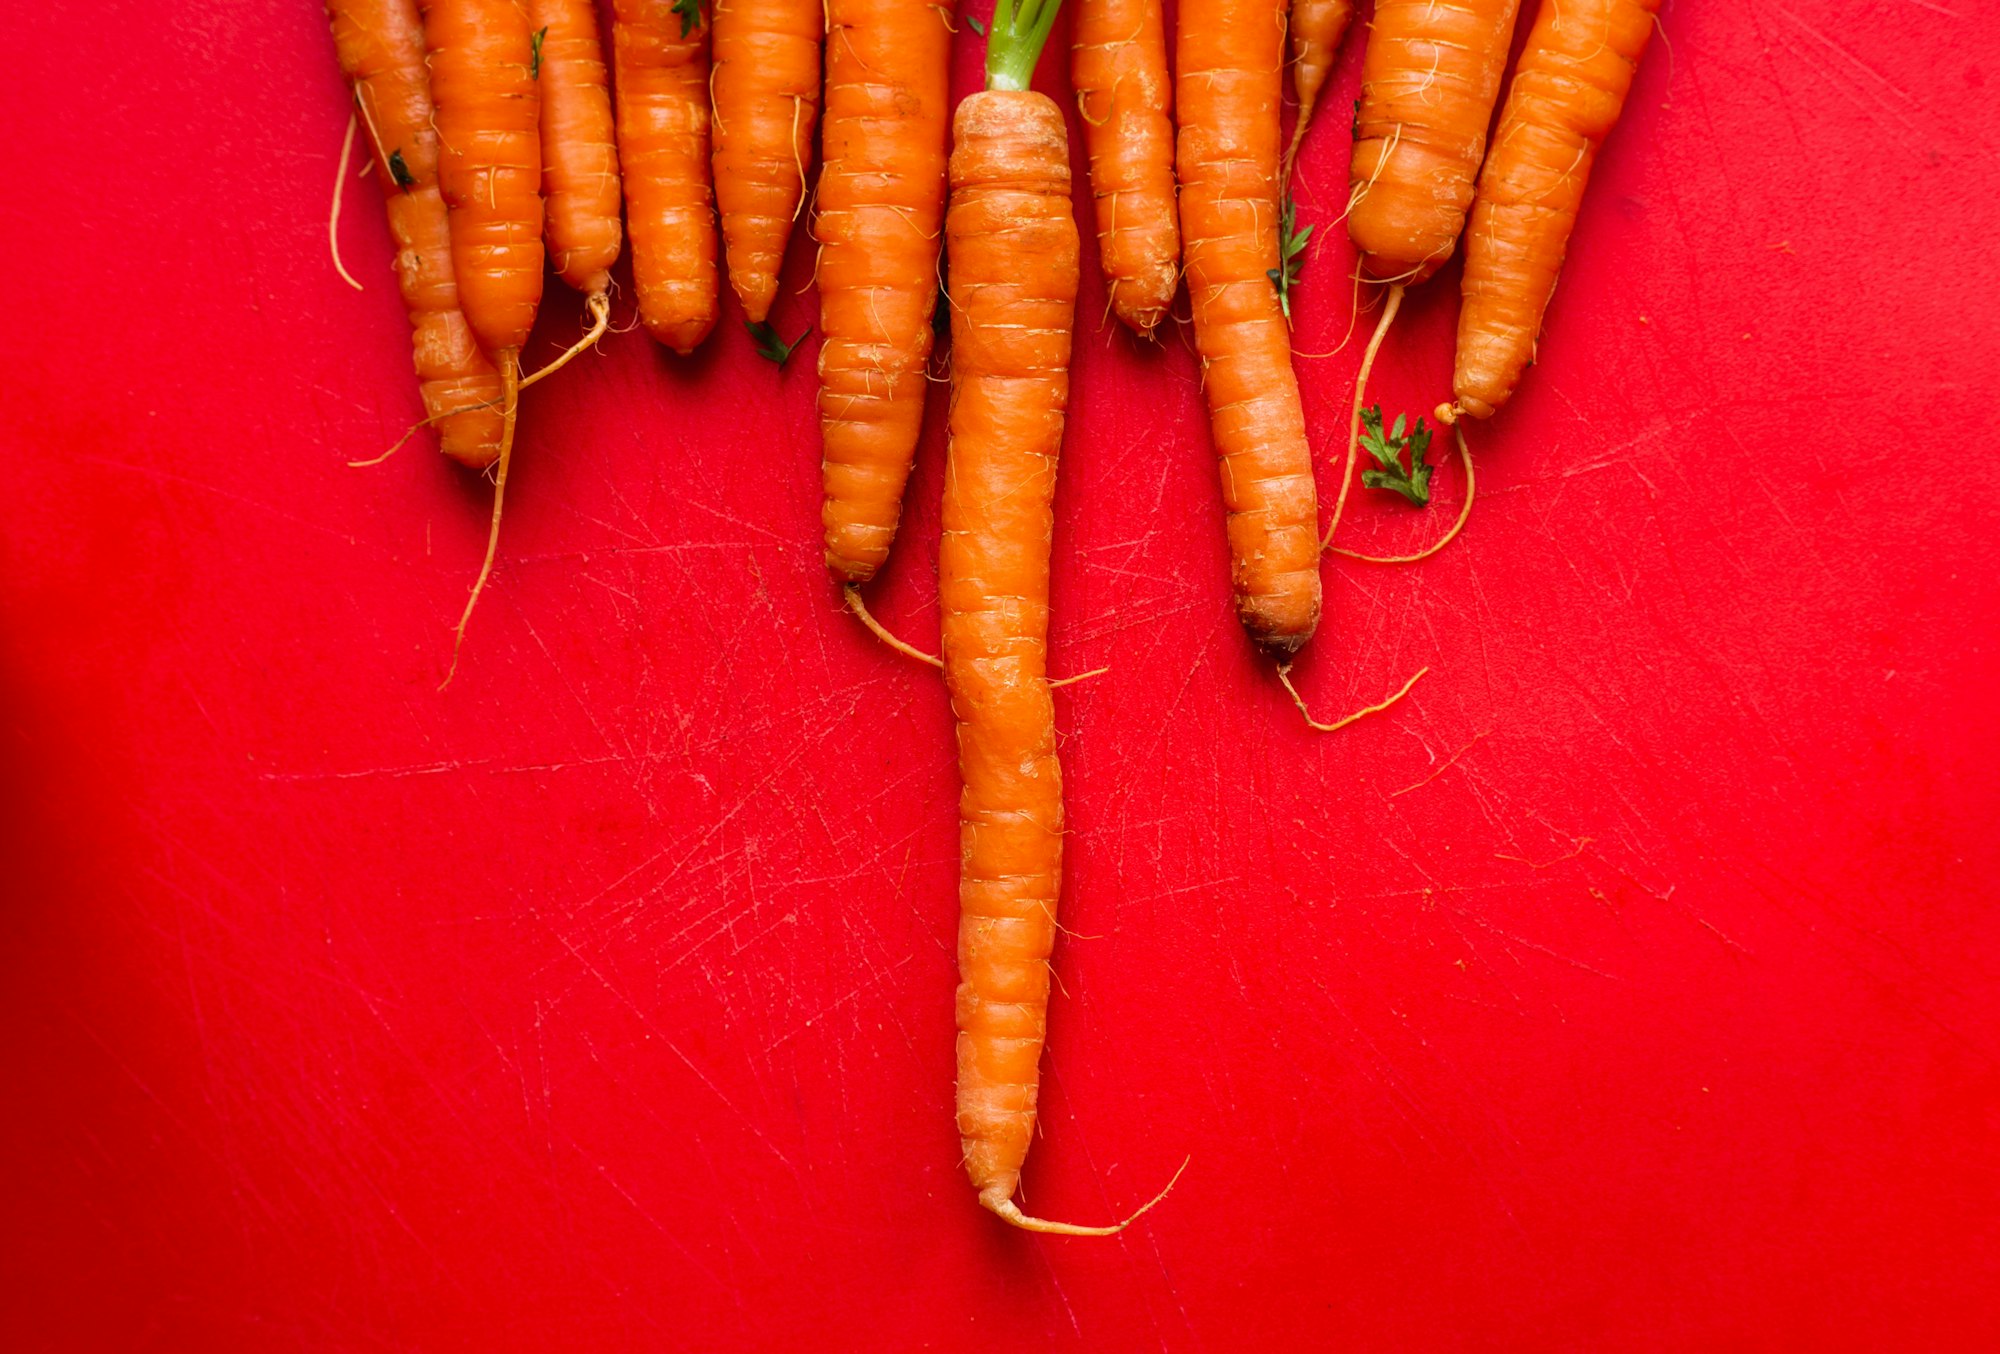 Carrots are an orange rainbow food by Louis Hansel for Unsplash